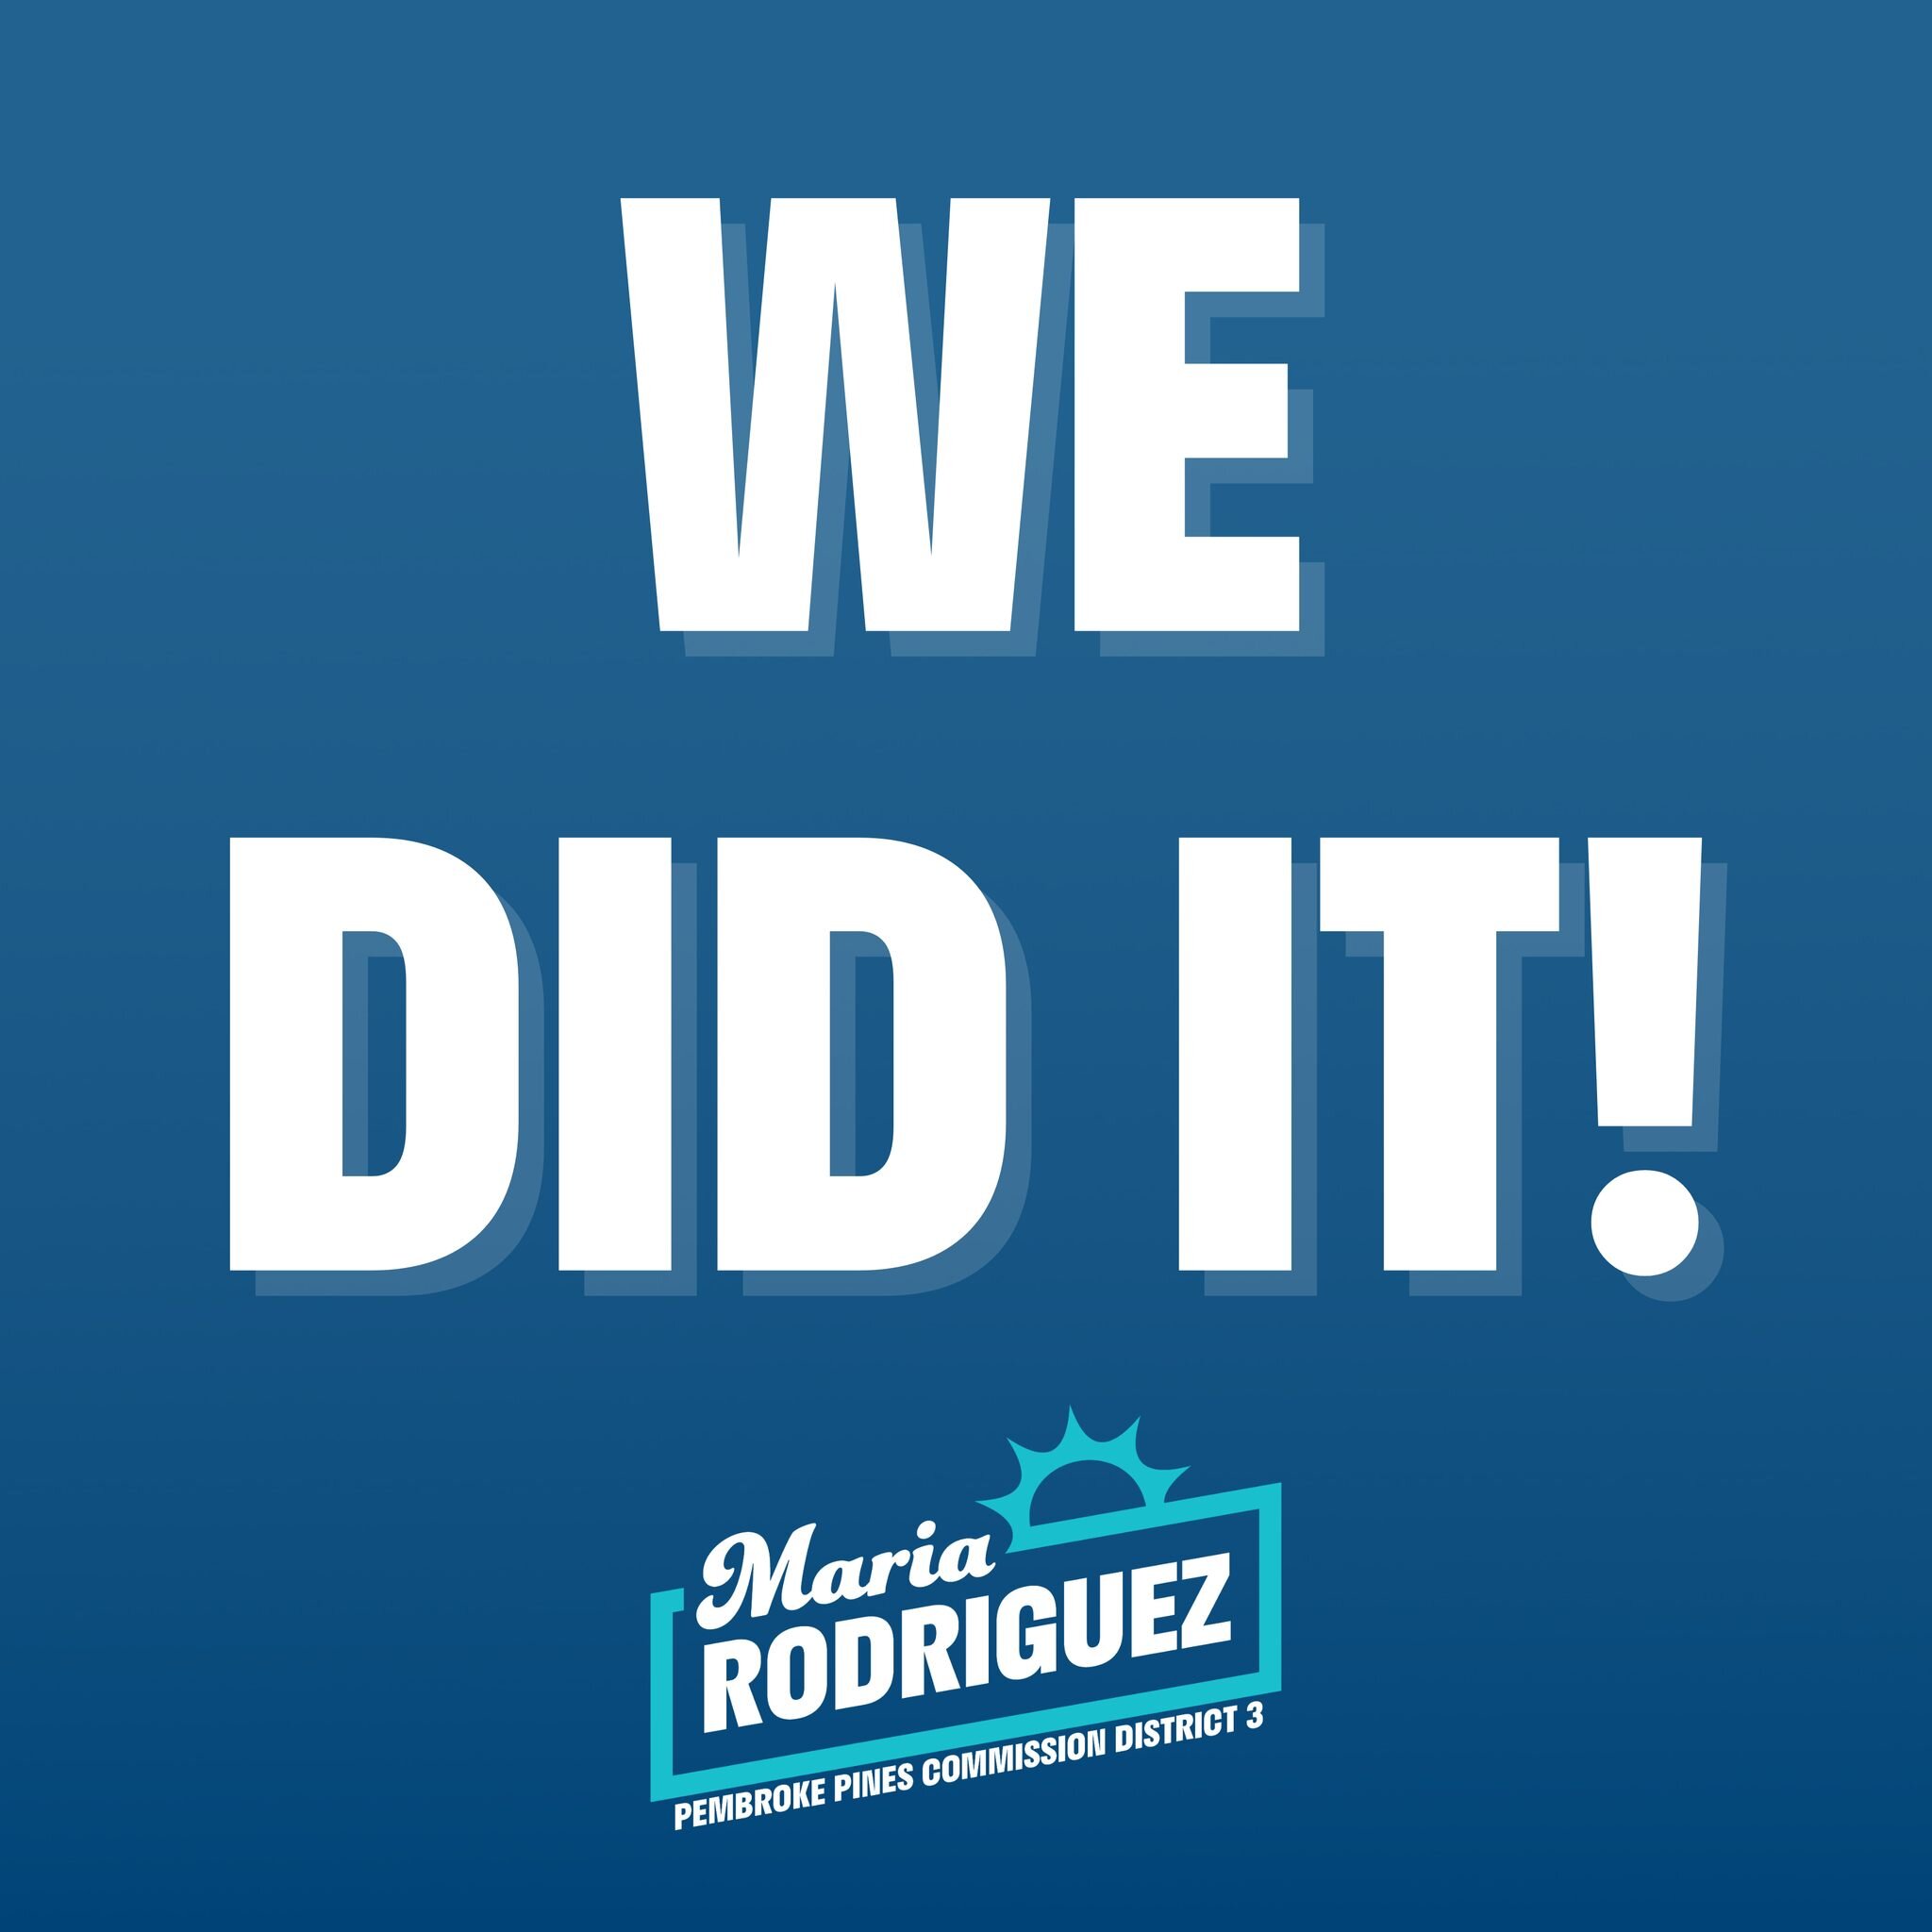 WE DID IT!!! I want to thank the voters for their trust and support as we&rsquo;ve worked to make history and bring a fresh perspective to Pembroke Pines! I am so so proud of our campaign and everyone who made this win possible!